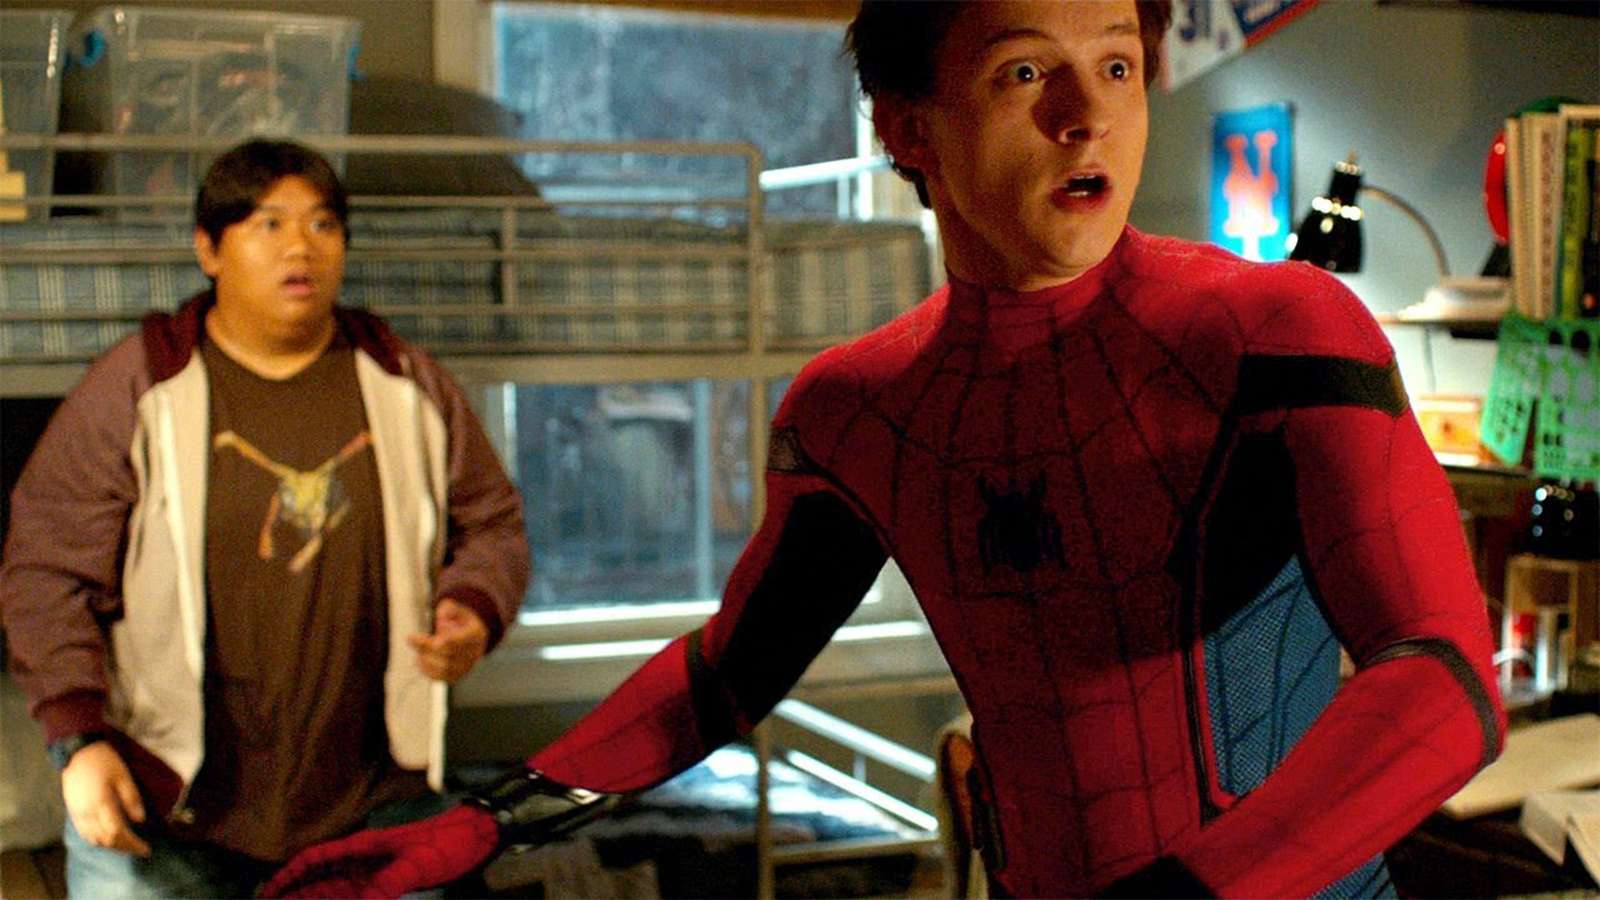 Ned and Spider-Man